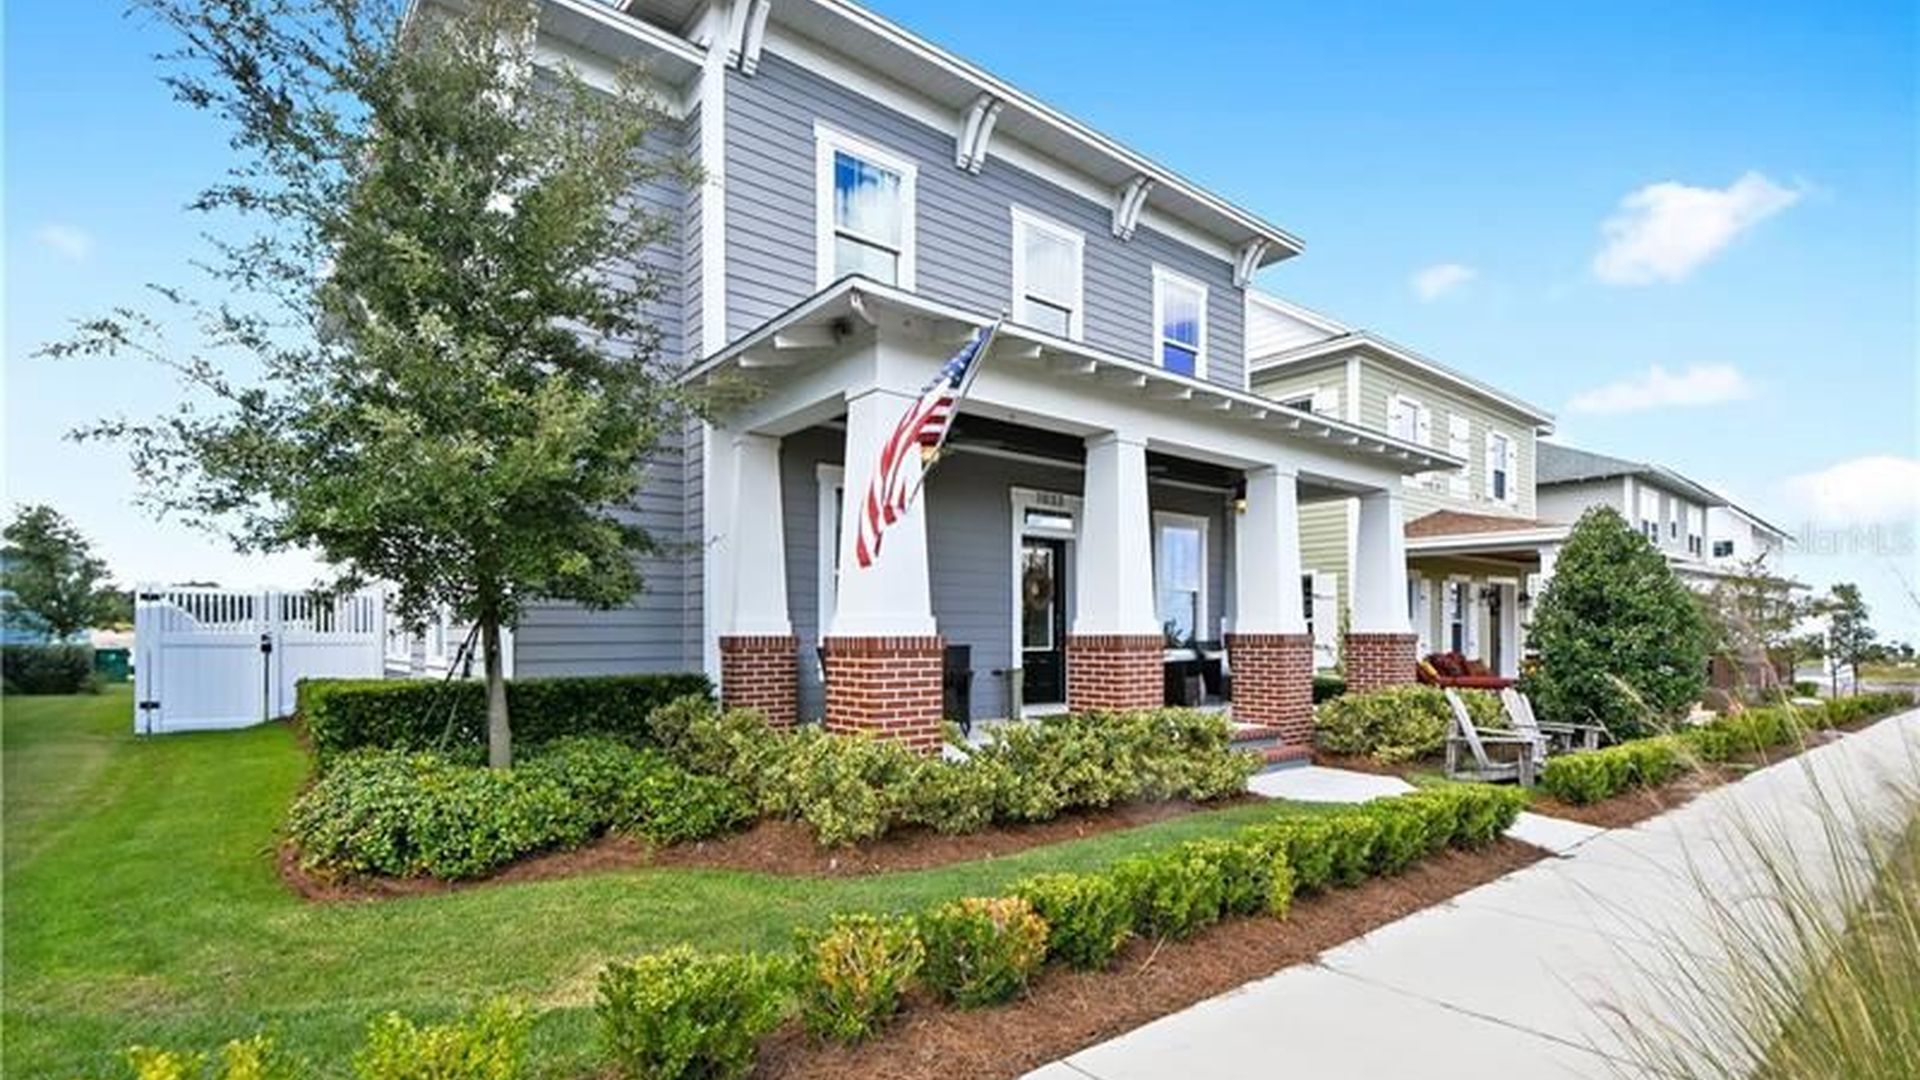 This Oakland Park home, at 1033 Colleton Alley,  Winter Garden, sold April 10, for $660,000.  zillow.com